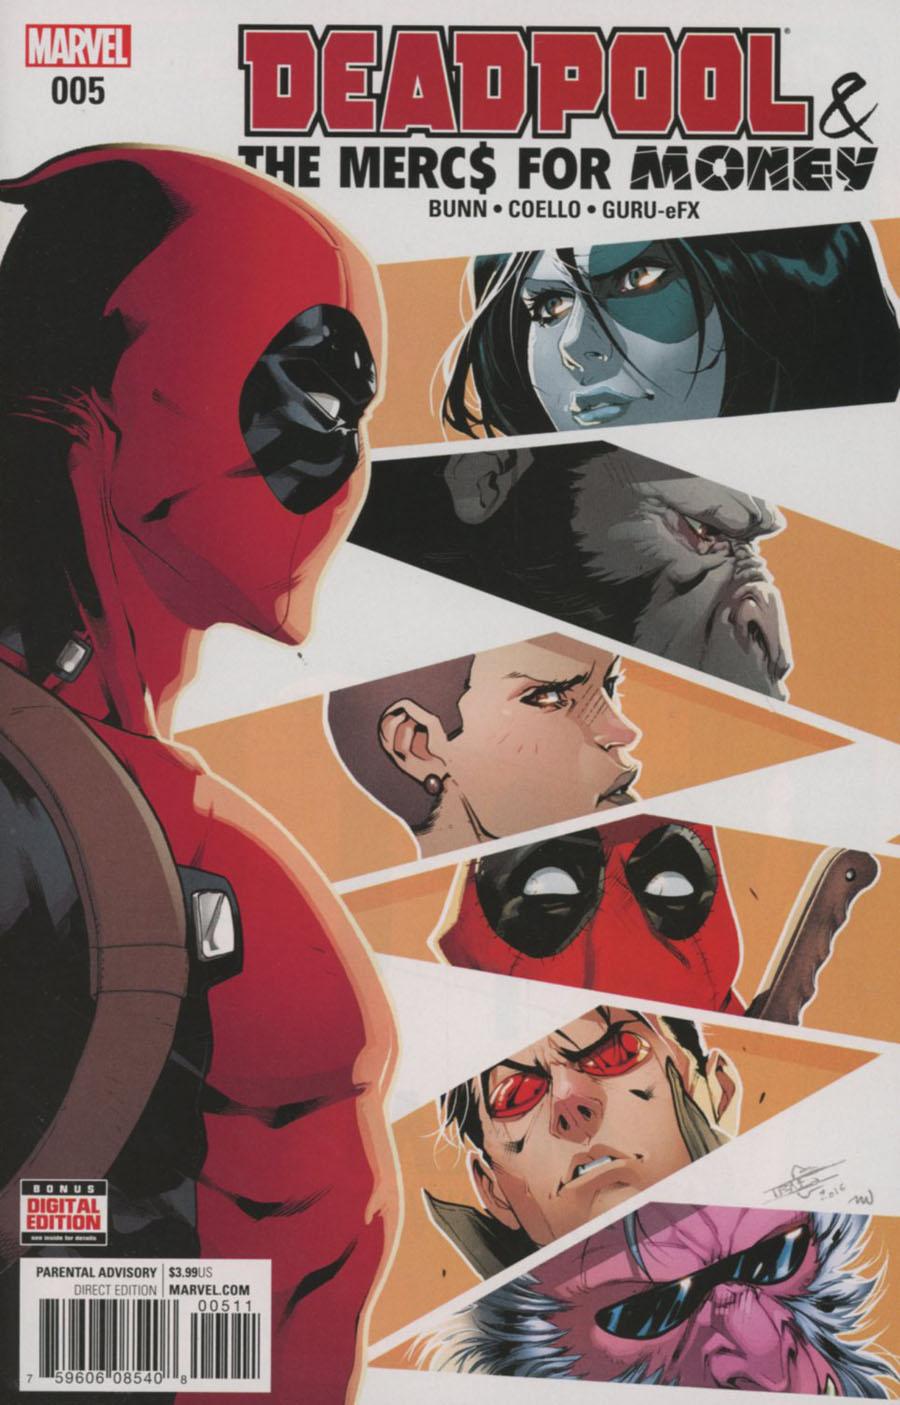 Deadpool And The Mercs For Money Vol. 2 #5